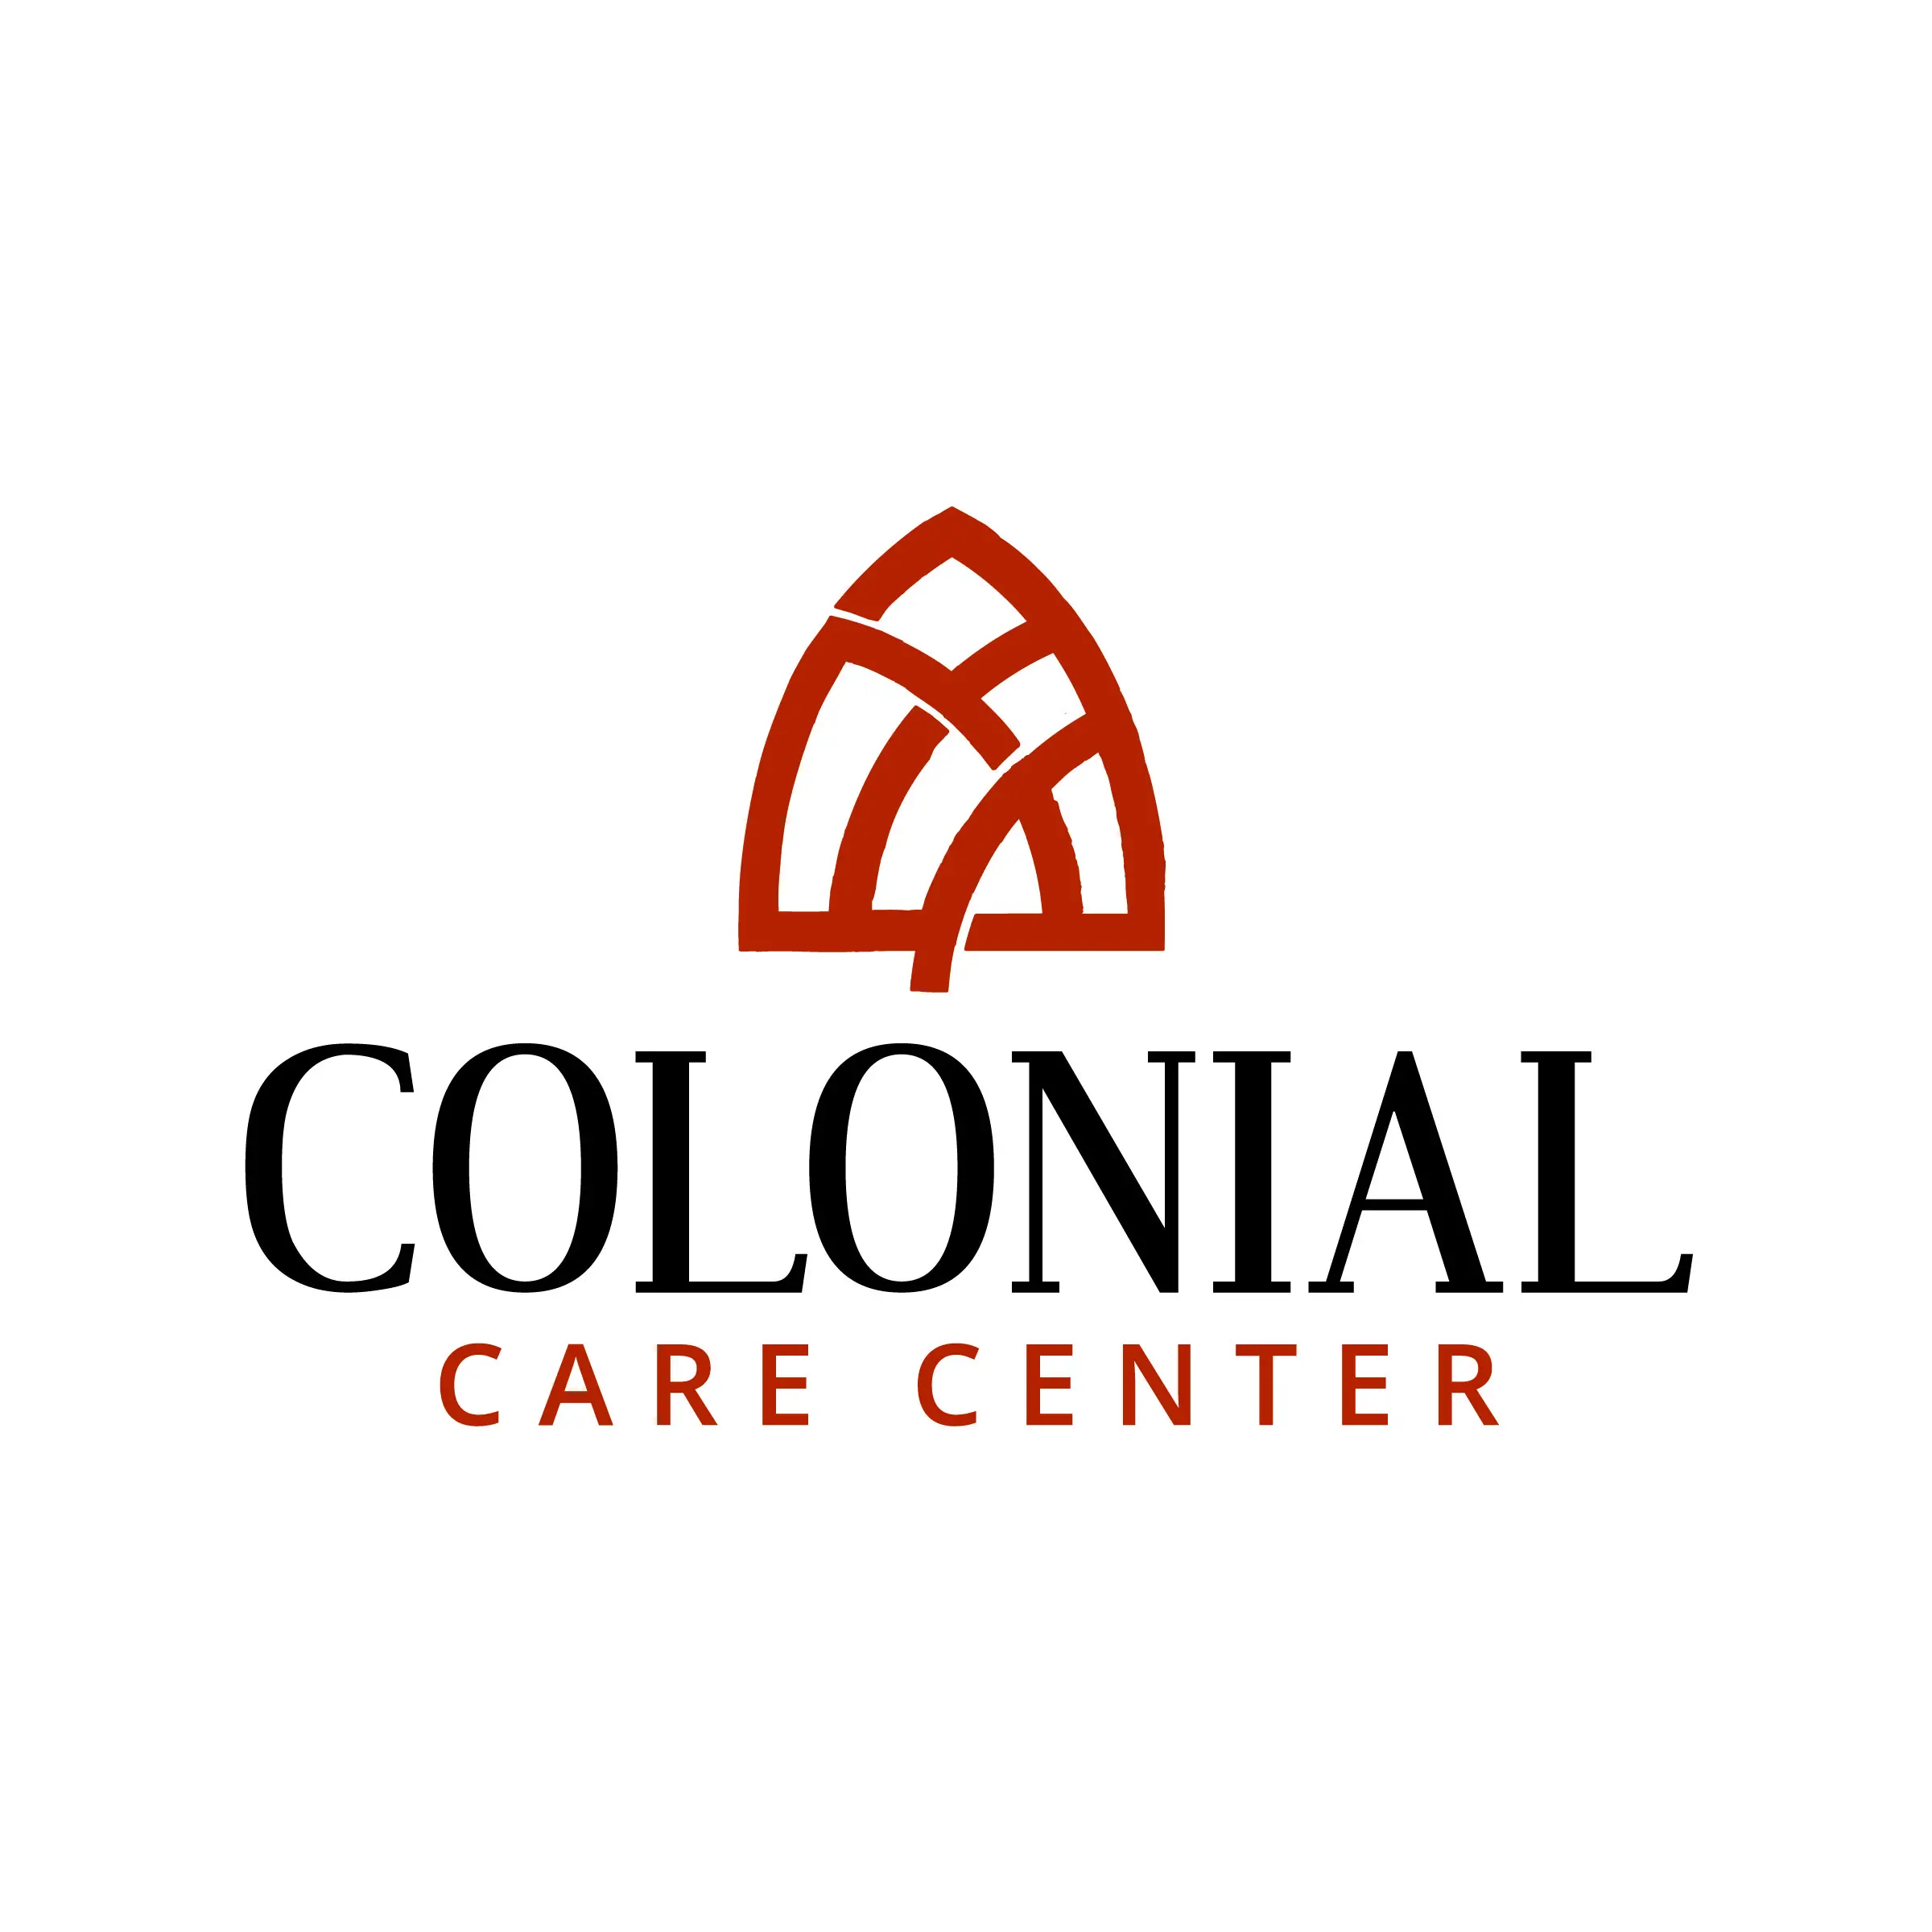 Colonial Care Center Announces New Ownership